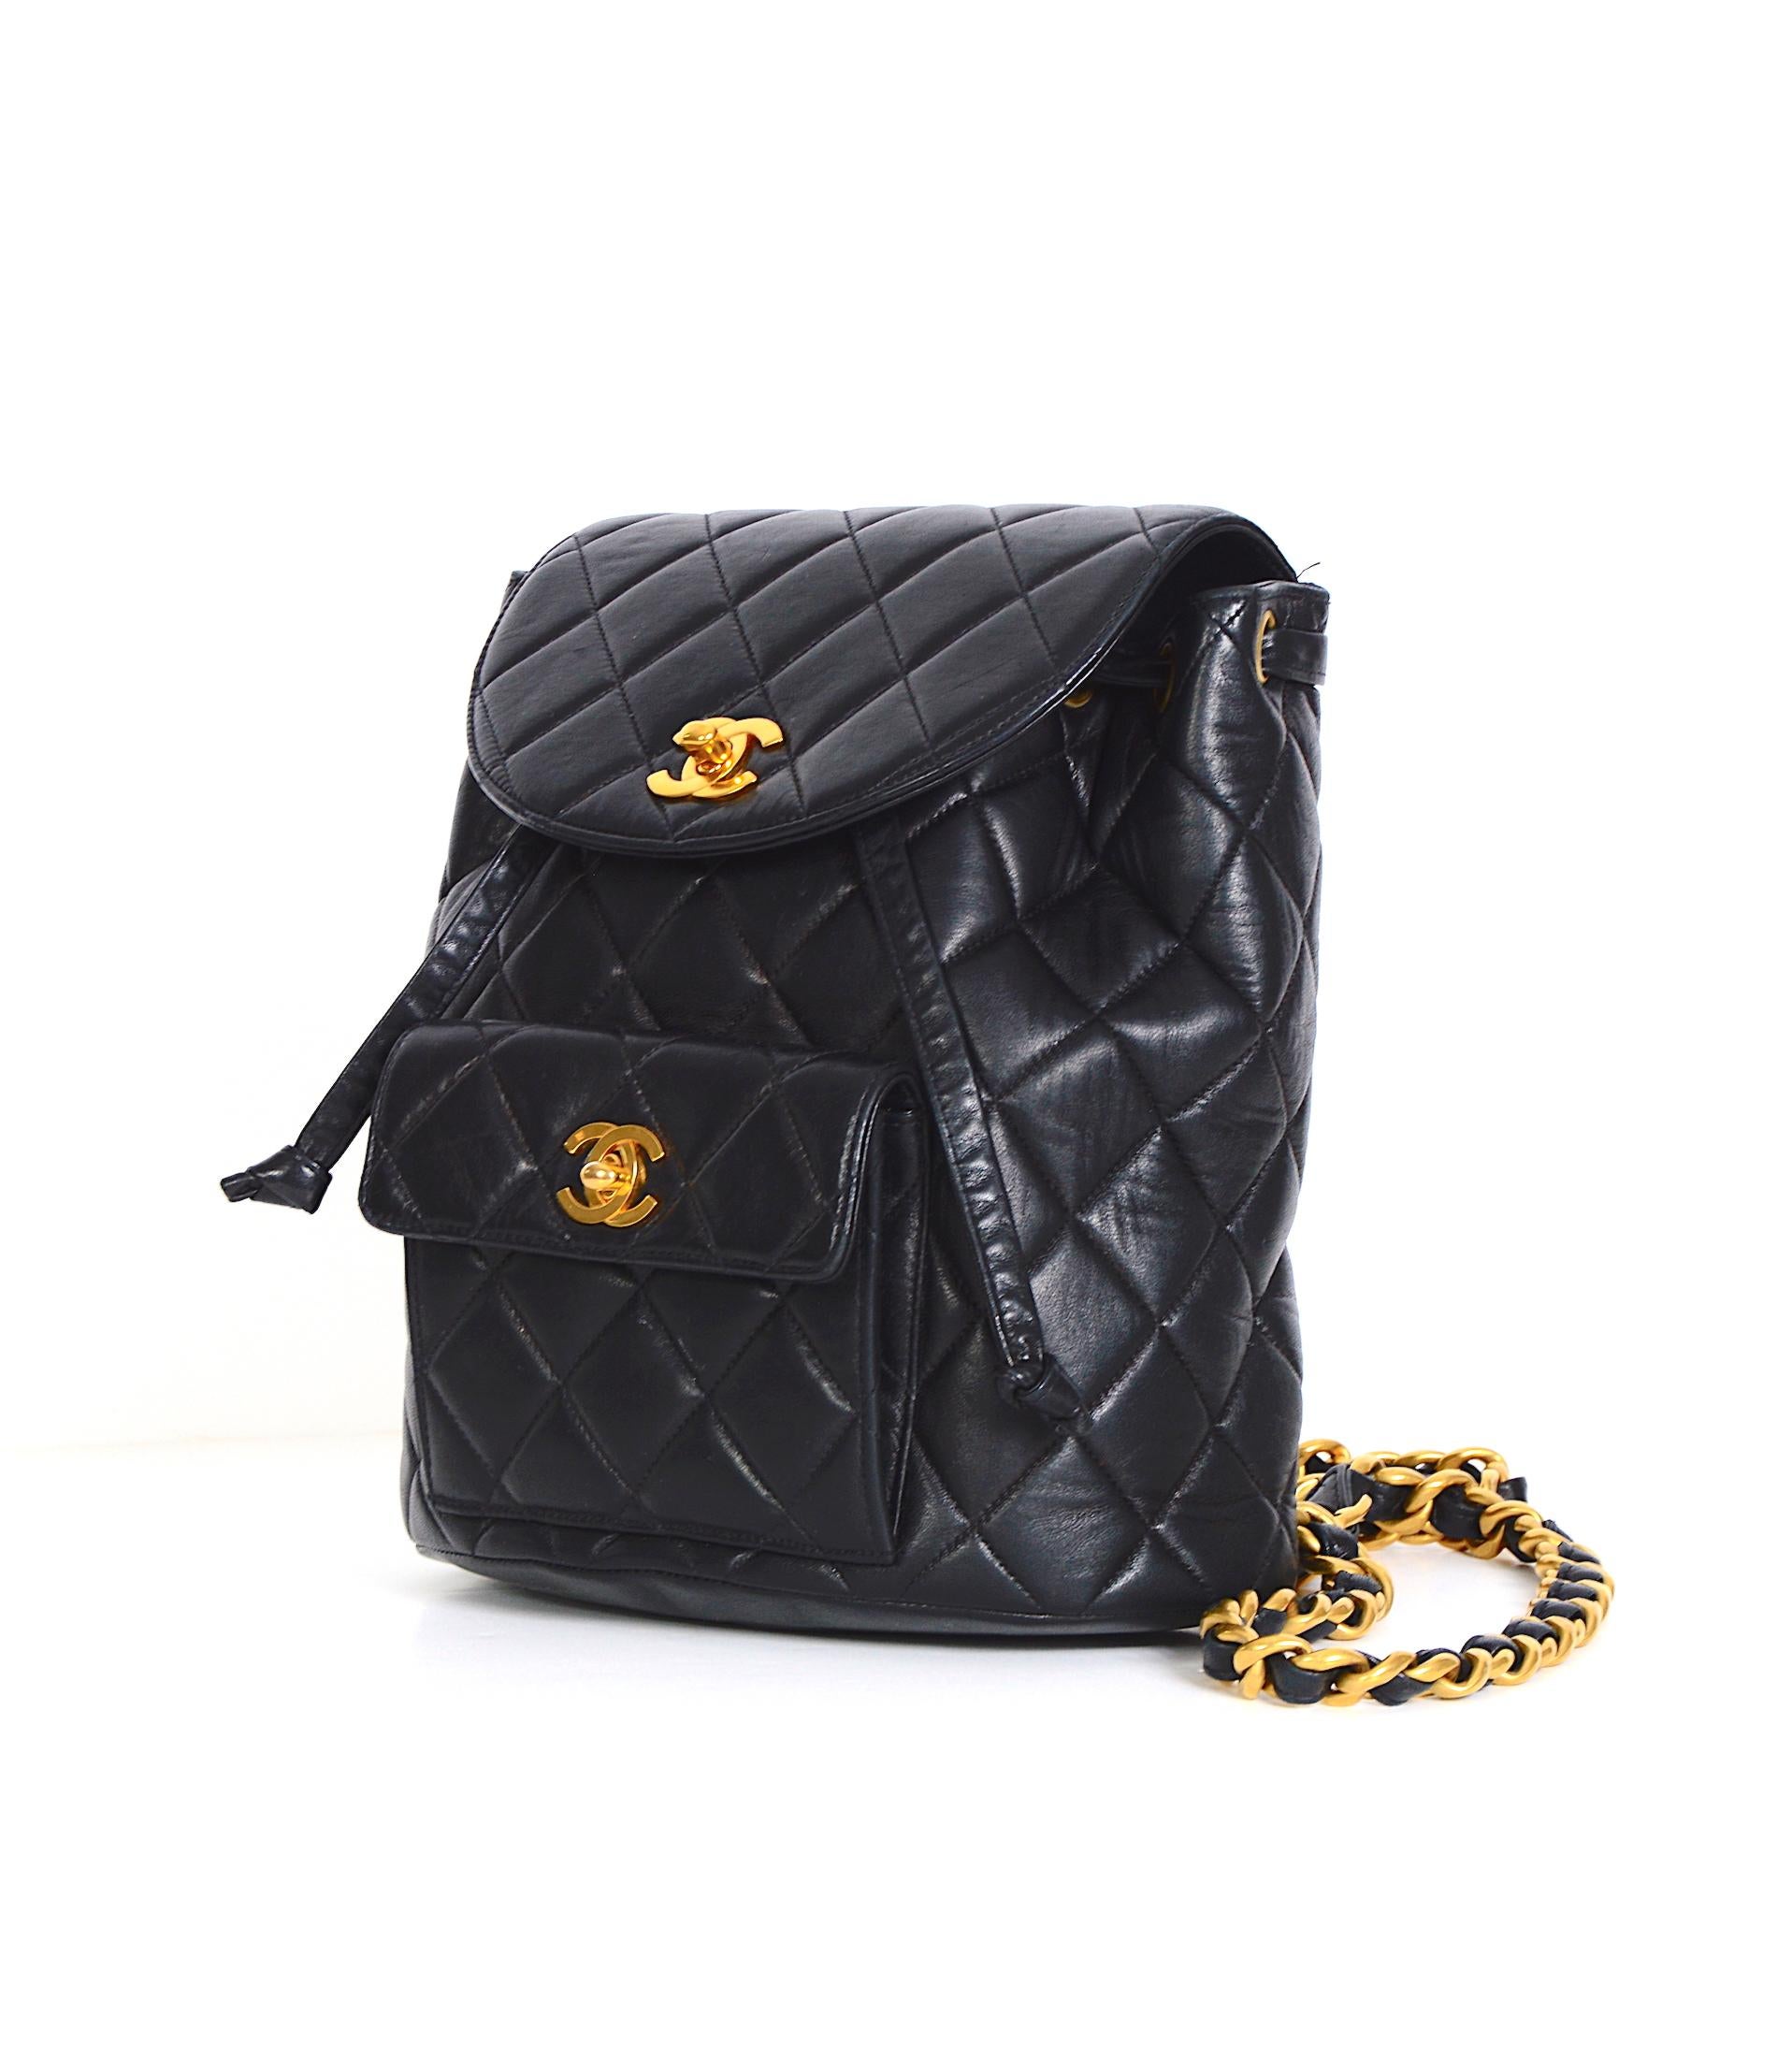 Chanel Investment Piece!
Stunning condition authentic Chanel vintage collectible 1994 quilted black lambskin Duma CC logo backpack
Item Name: Chanel Vintage Quilted Black Lambskin Duma Backpack Bag CC Logo 
Measurements:
Height: 10 in. (25.4